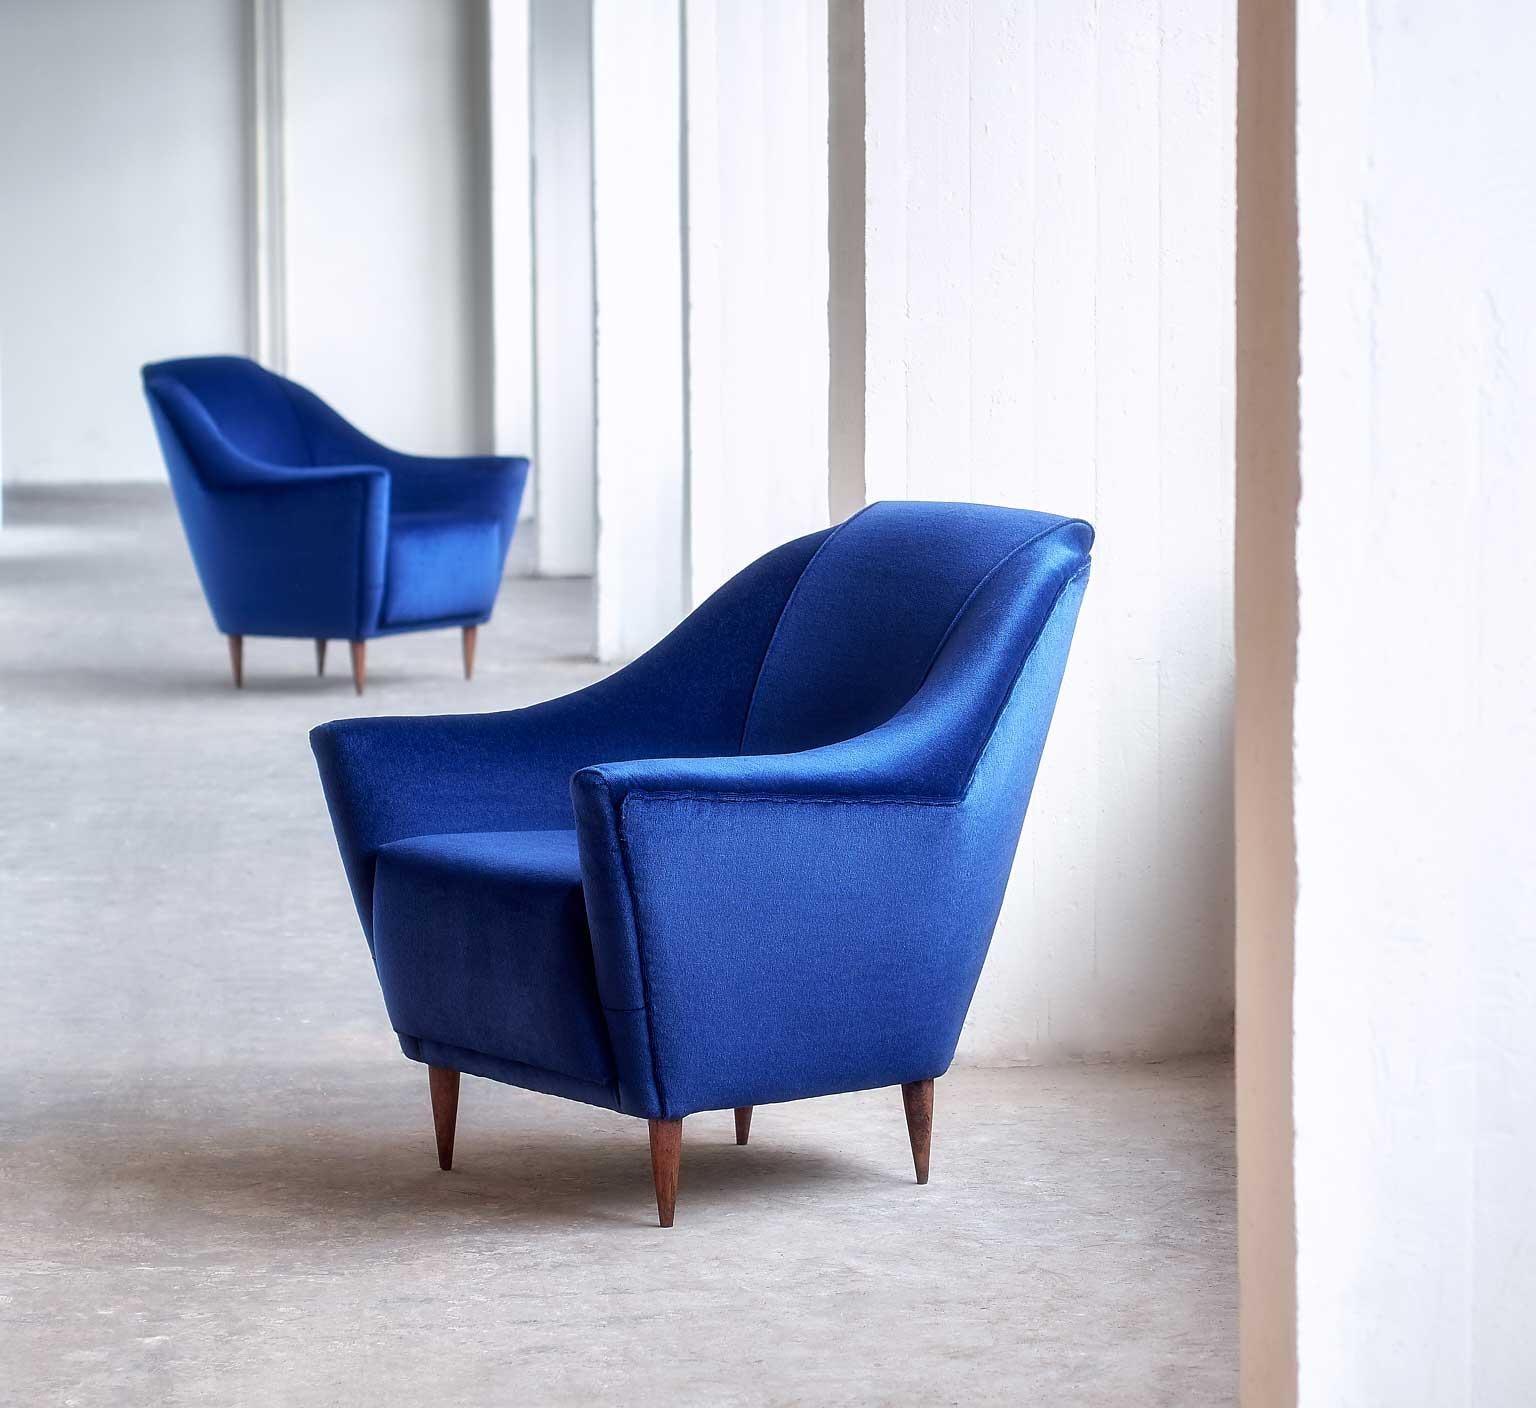 These sumptuous armchairs were designed by Ico Parisi in 1951. This particular model was manufactured by Ariberto Colombo in Cantu, Italy. 
The pronounced curves and lines of the design give the chairs a modern and elegant feel. The chairs have been